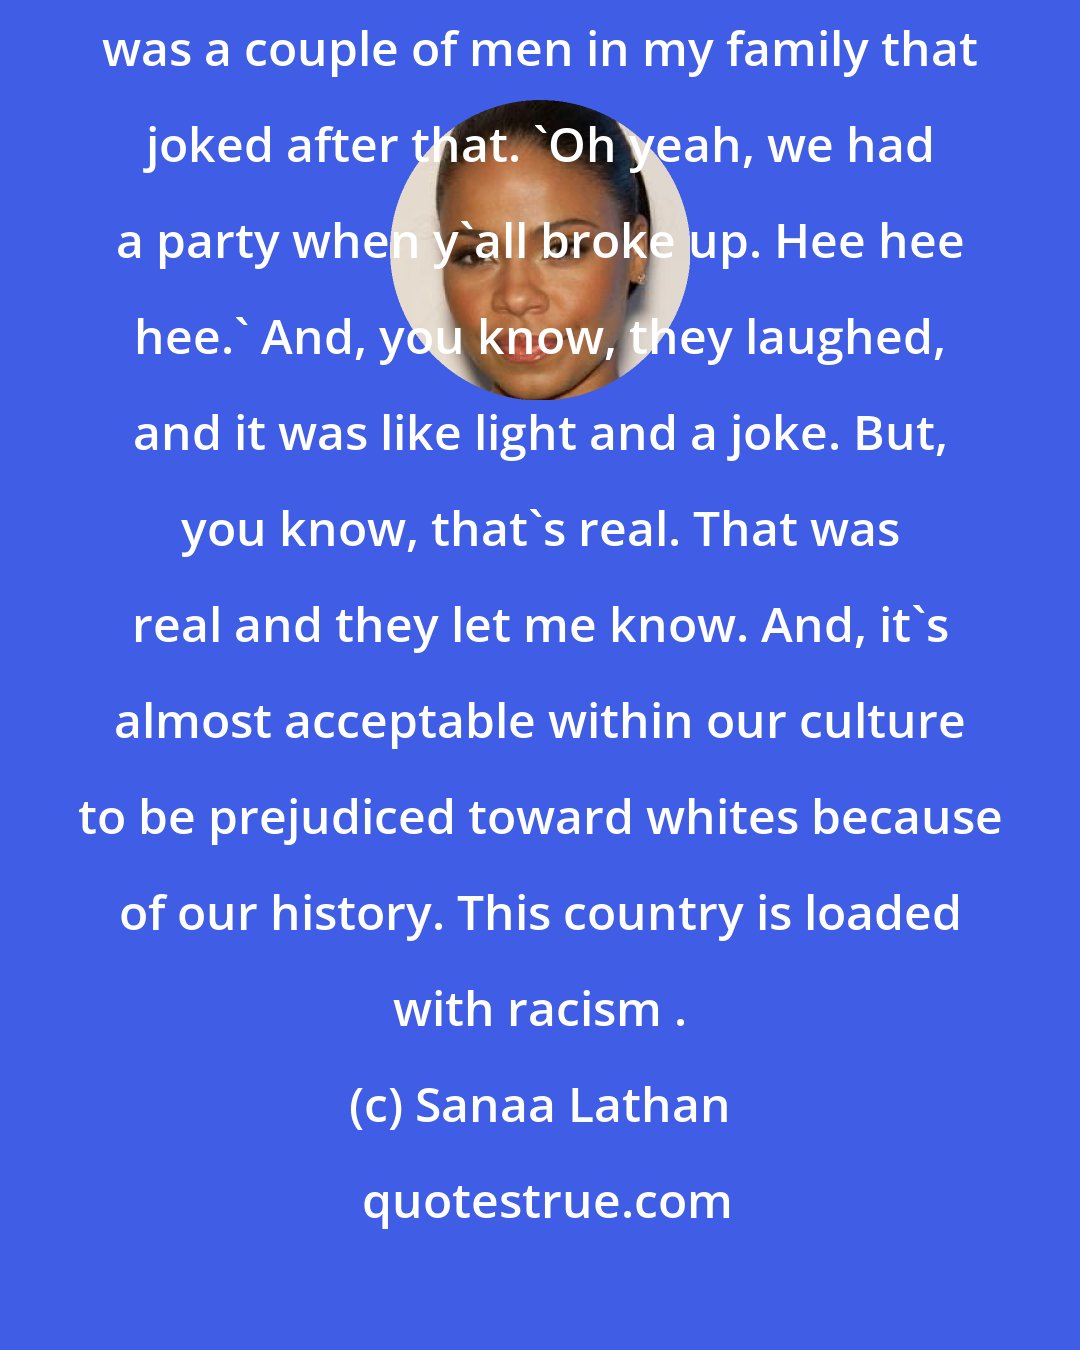 Sanaa Lathan: I remember after I dated this white man, nobody said anything but there was a couple of men in my family that joked after that. 'Oh yeah, we had a party when y'all broke up. Hee hee hee.' And, you know, they laughed, and it was like light and a joke. But, you know, that's real. That was real and they let me know. And, it's almost acceptable within our culture to be prejudiced toward whites because of our history. This country is loaded with racism .